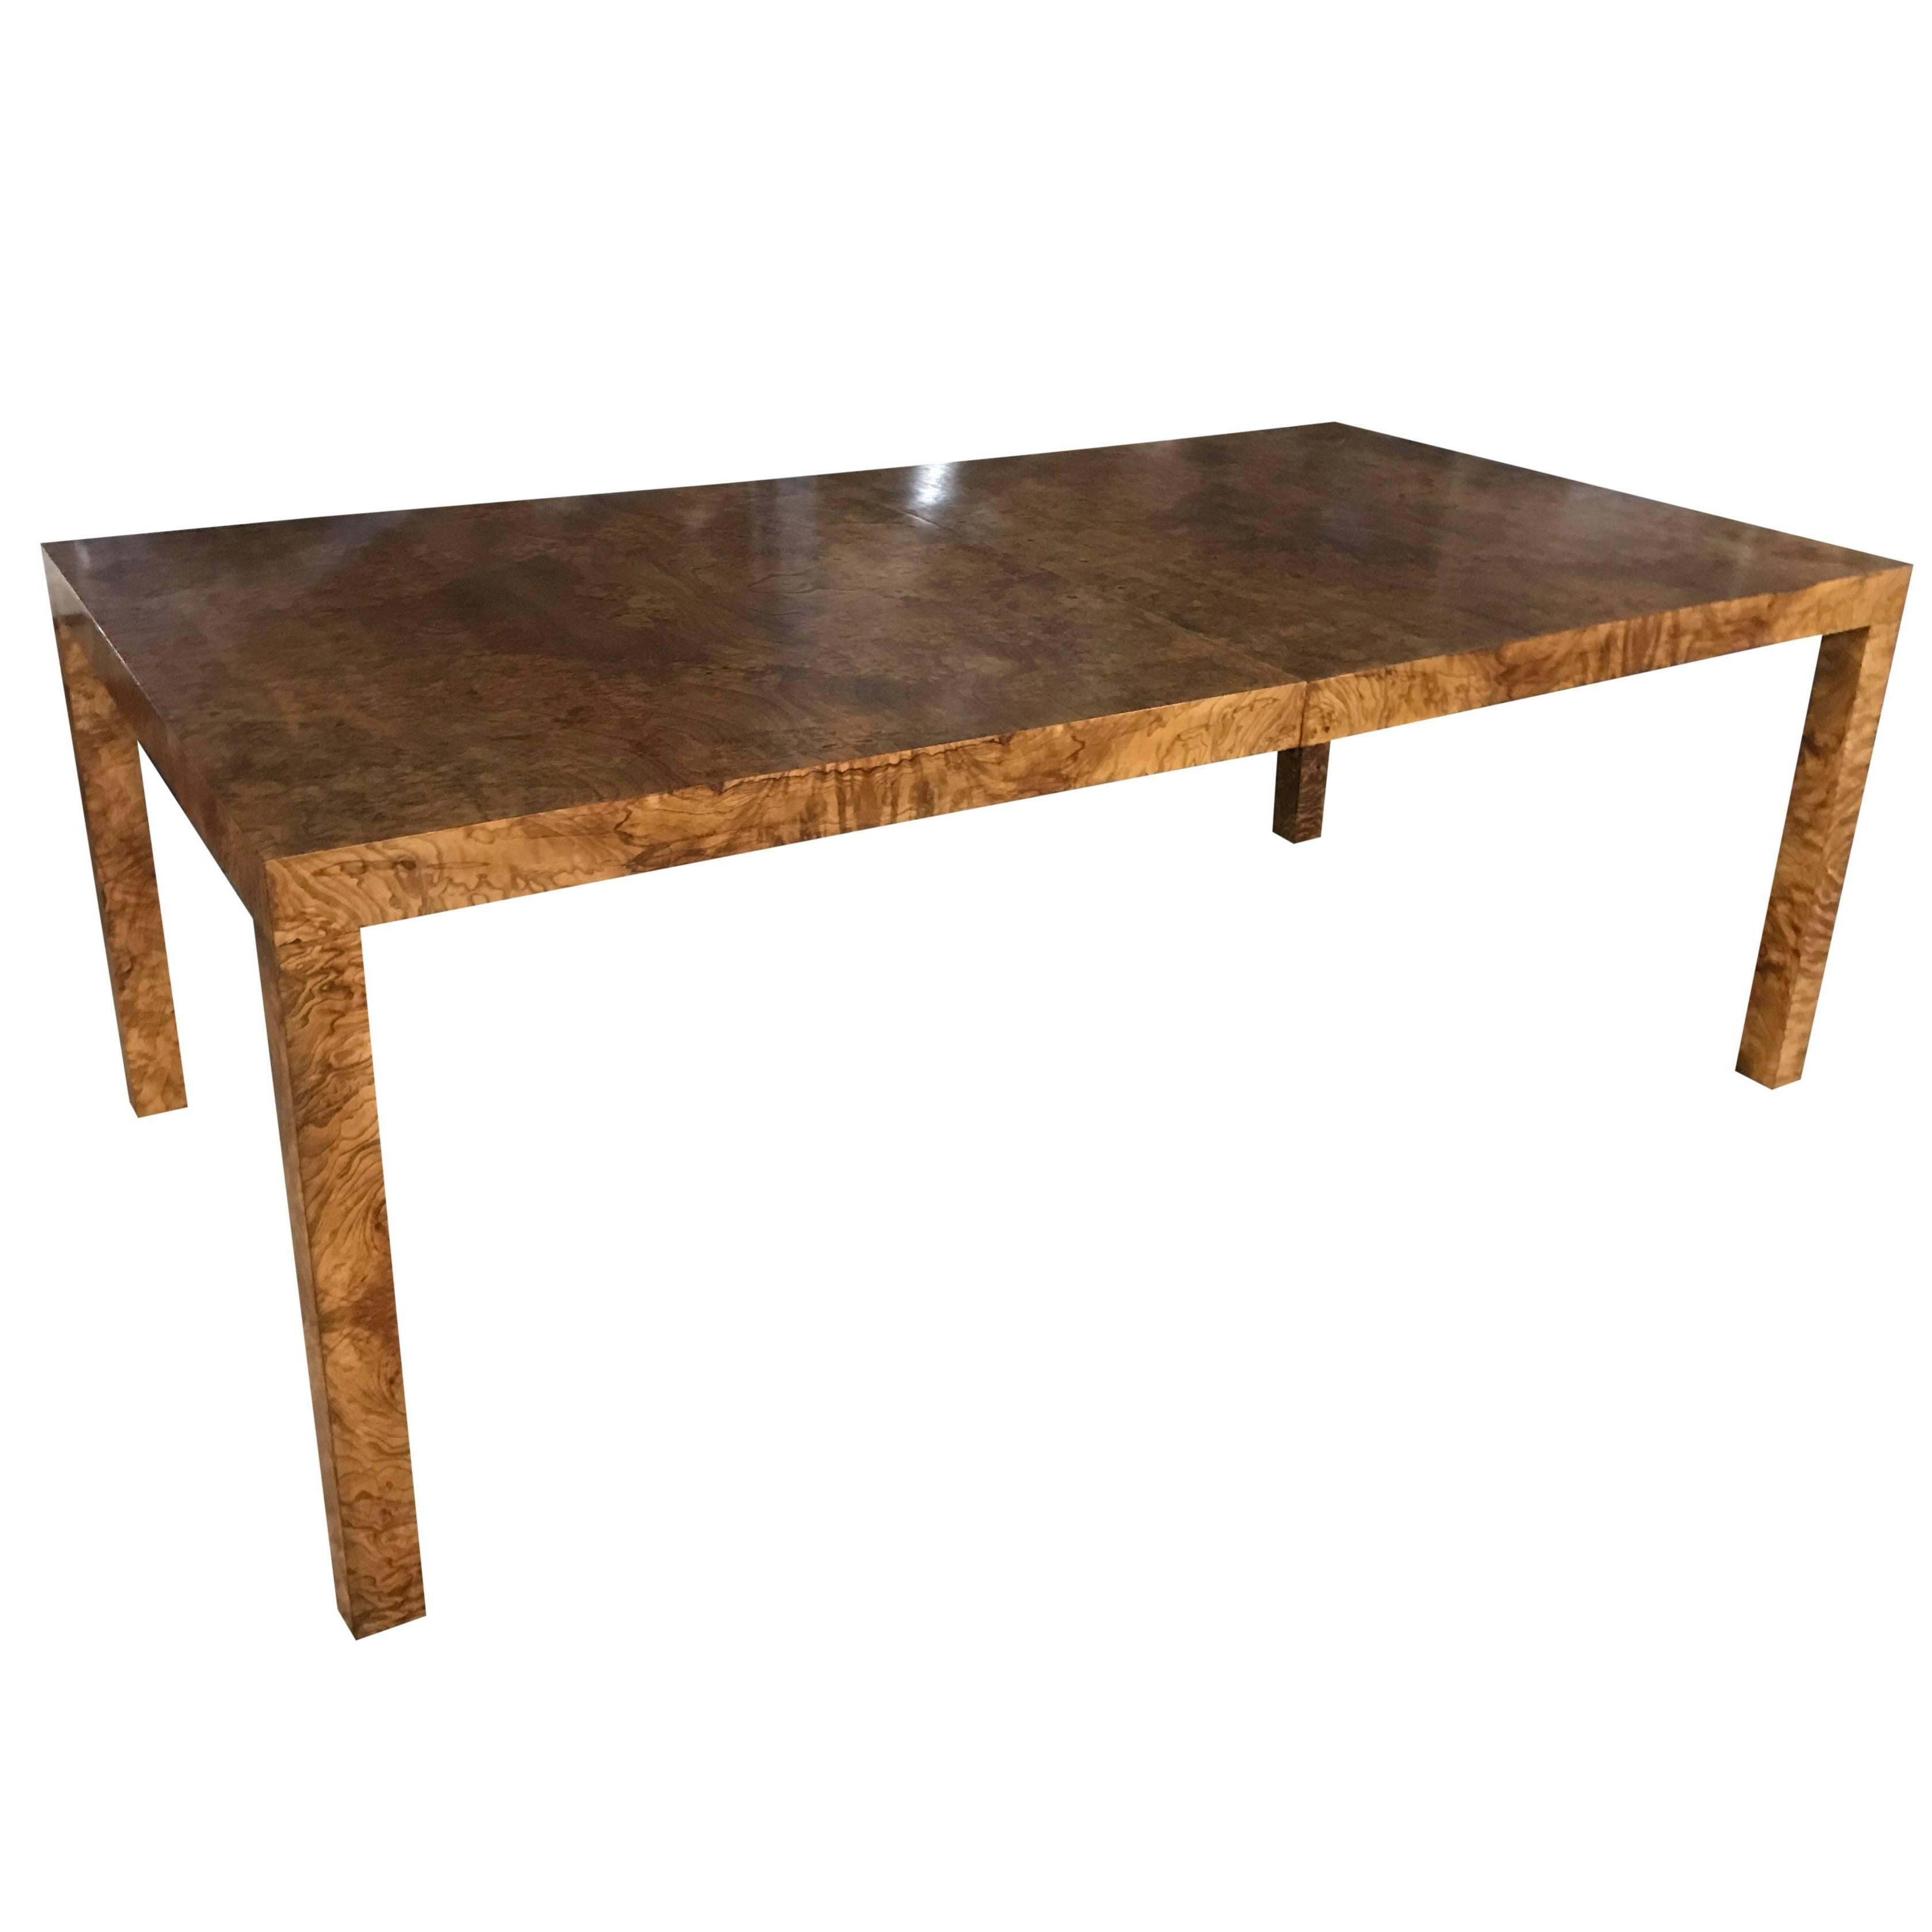 Large Milo Baughman for Directional burl wood Parsons dining table with two boards.
Hard to find, expertly finished Mid-Century Modern dining room table. Beautiful deep, rich variegated cinnamon coffee burl standing on four fully finished square